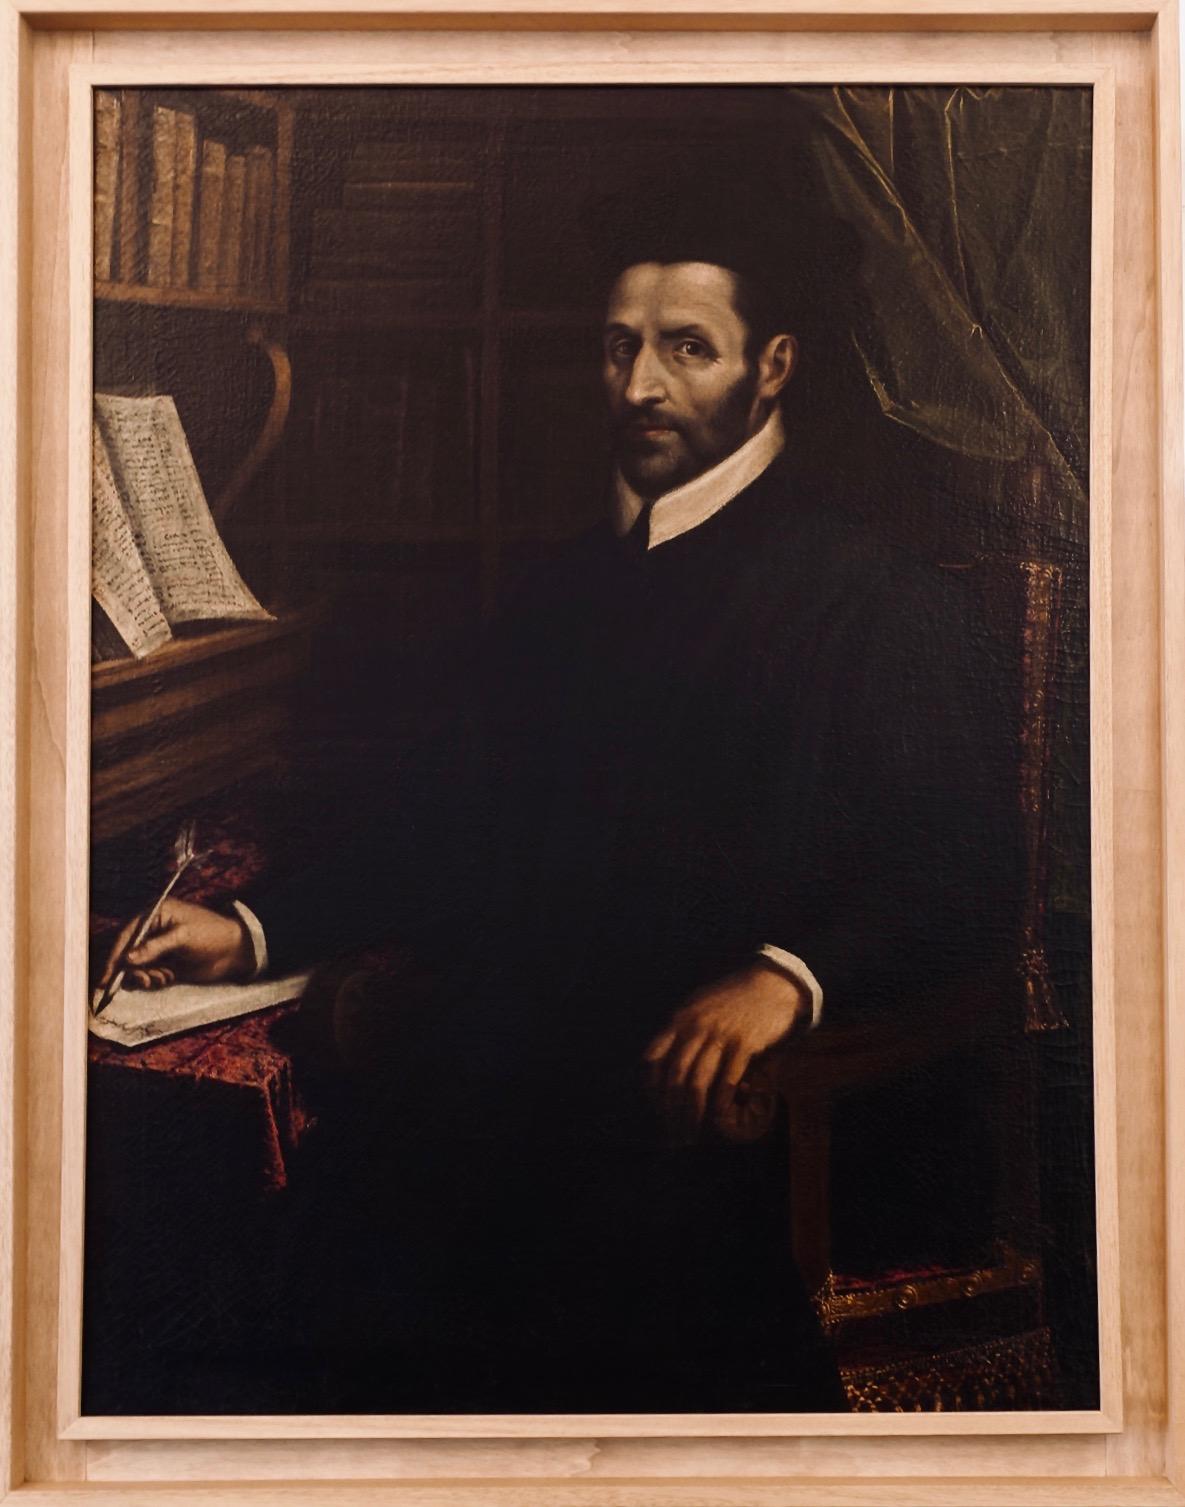 Leandro Bassano (Bassano del Grappa 1557 - Venise 1662)

Portrait of a savant
Venise, XVI century
Oil on canvas; modern frame.
Measures: 117 x 88 cm

- Attribution proposed by Professeur David Dotti, expertise dated 2012.

Son of the great